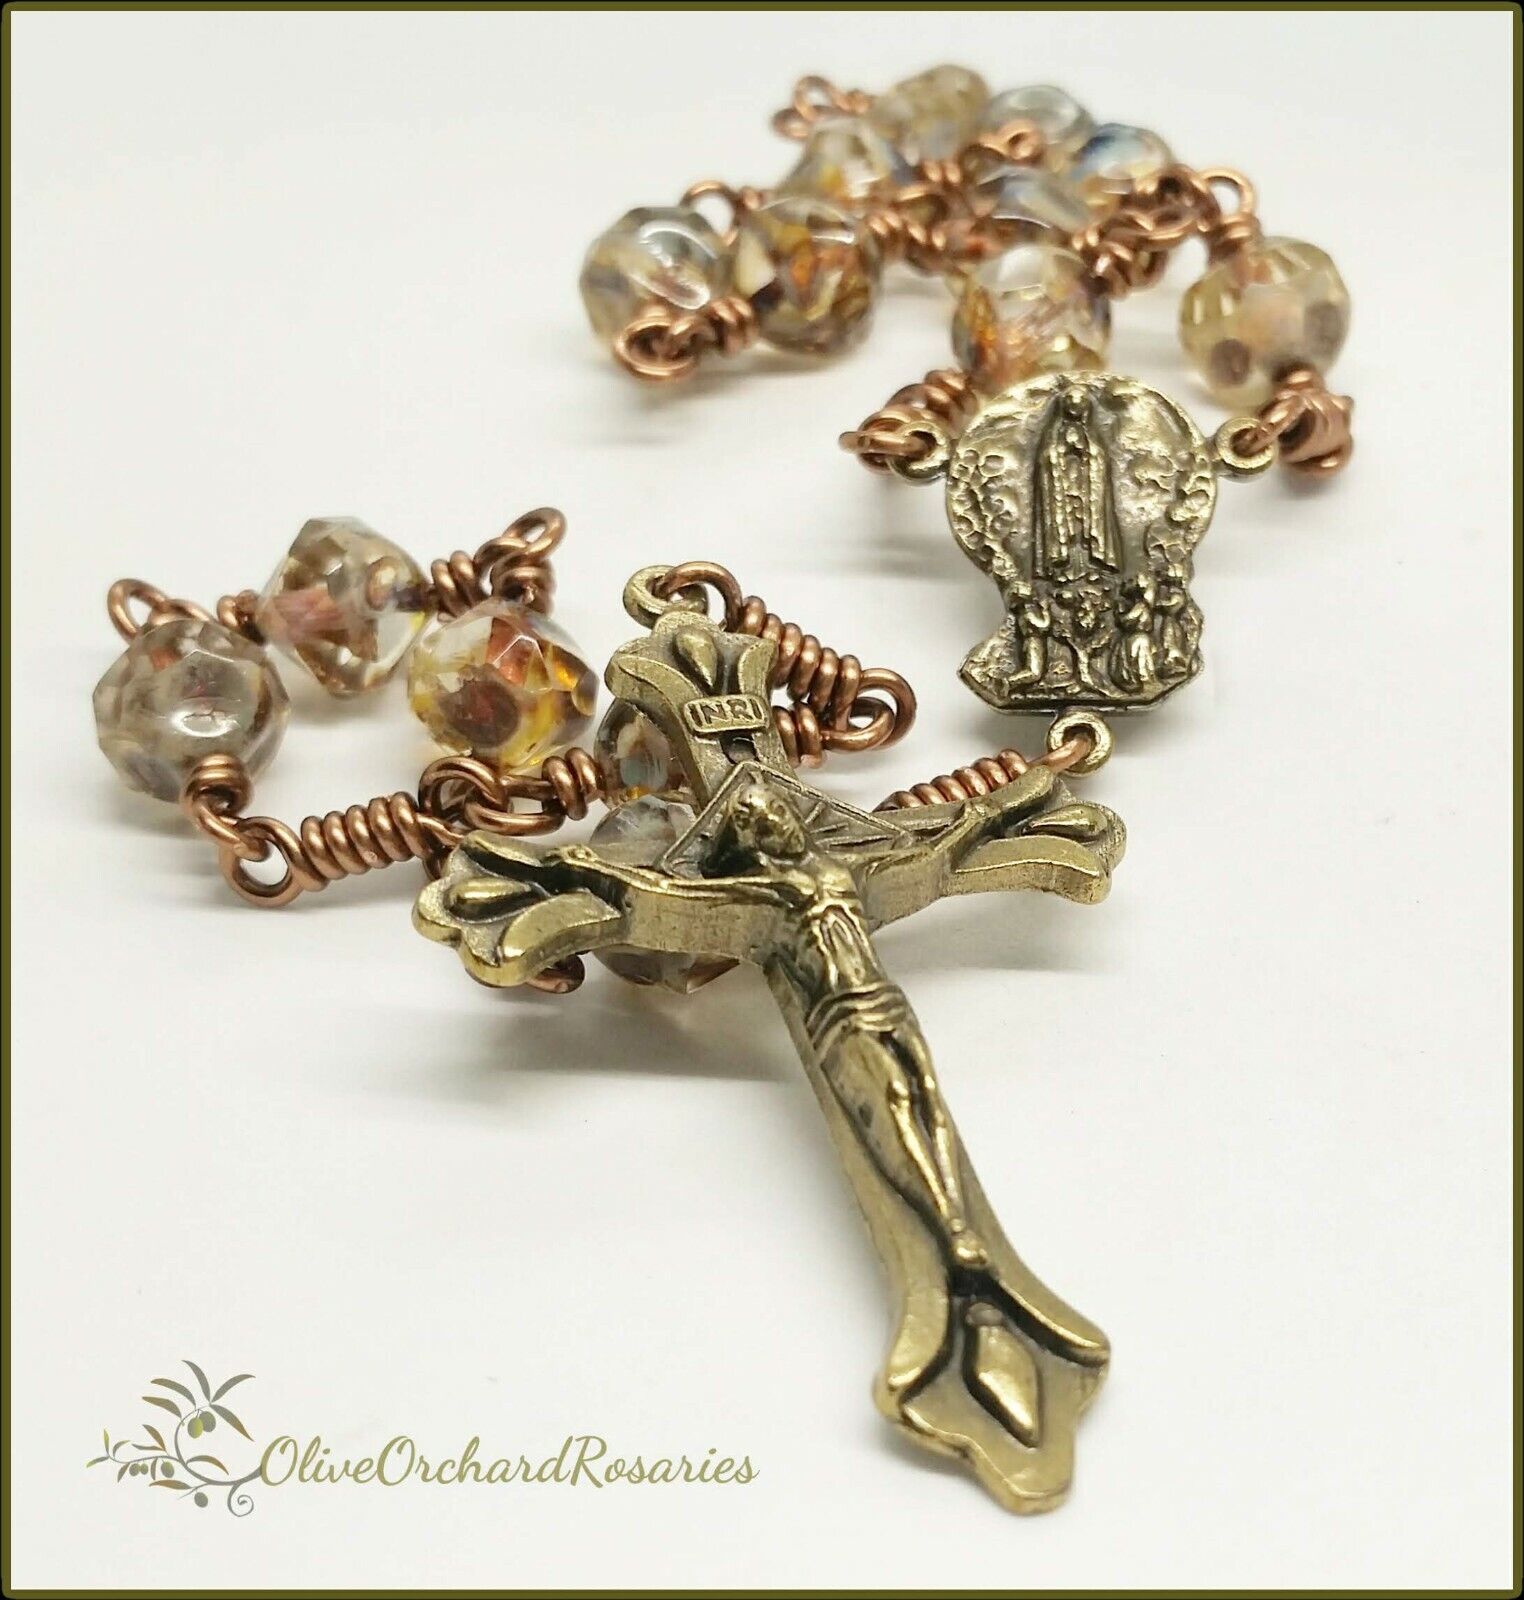 Handmade Our Lady of Fatima Picasso Czech Glass Beads Large One-decade Rosary